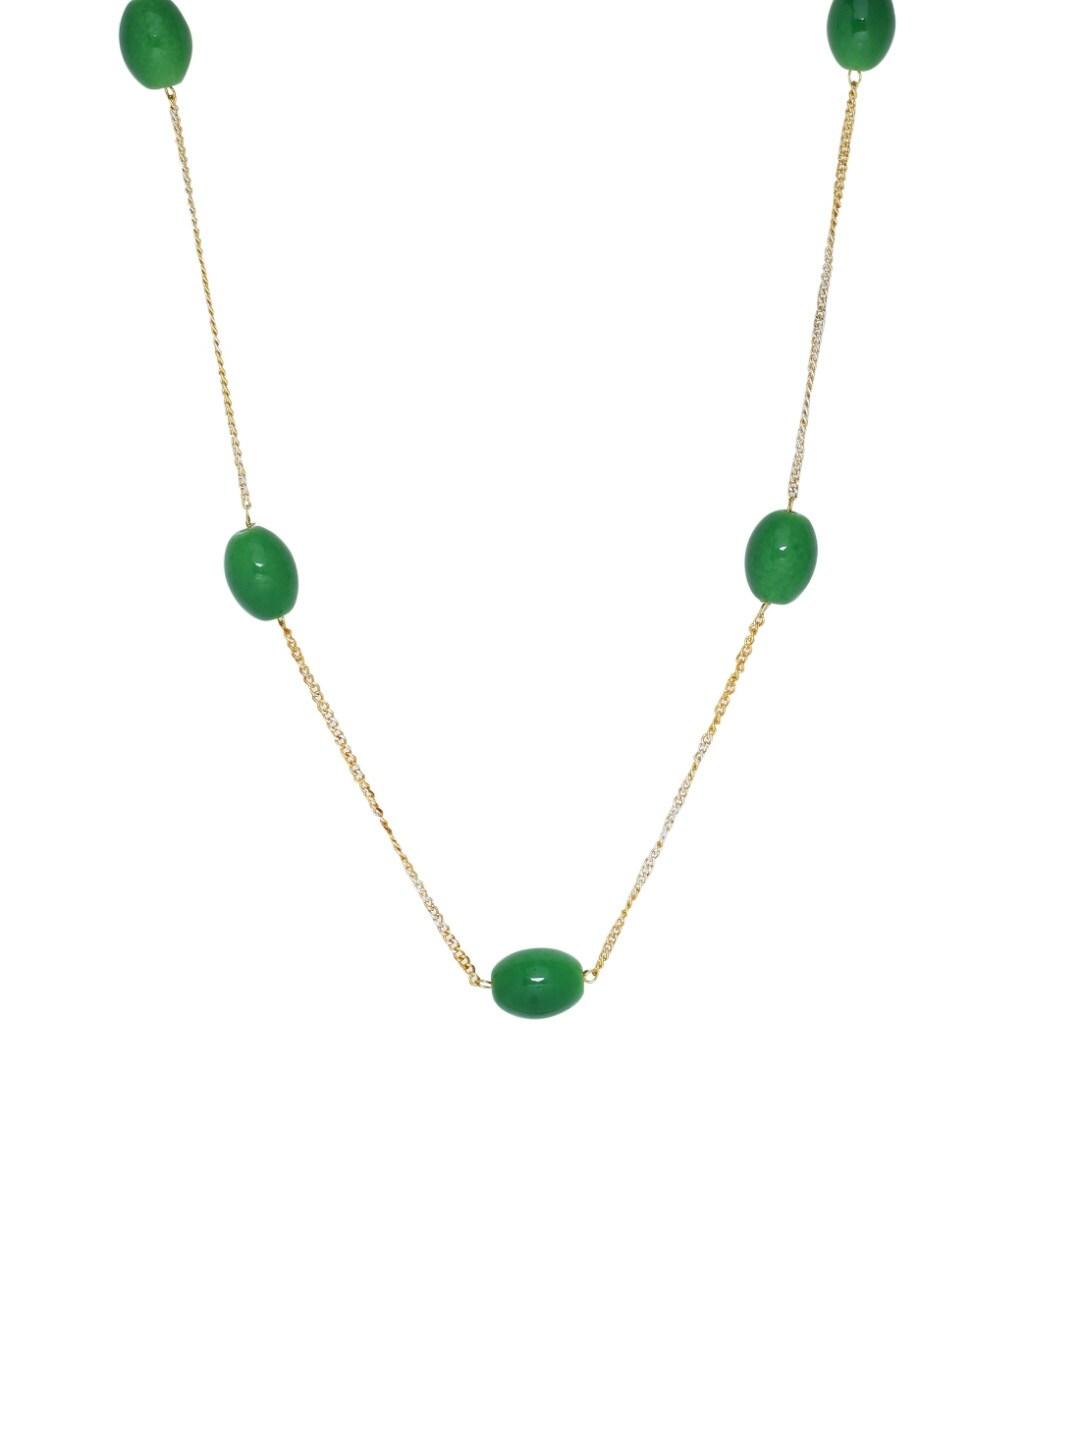 Silvermerc Designs Gold-Plated & Green Handcrafted Chain